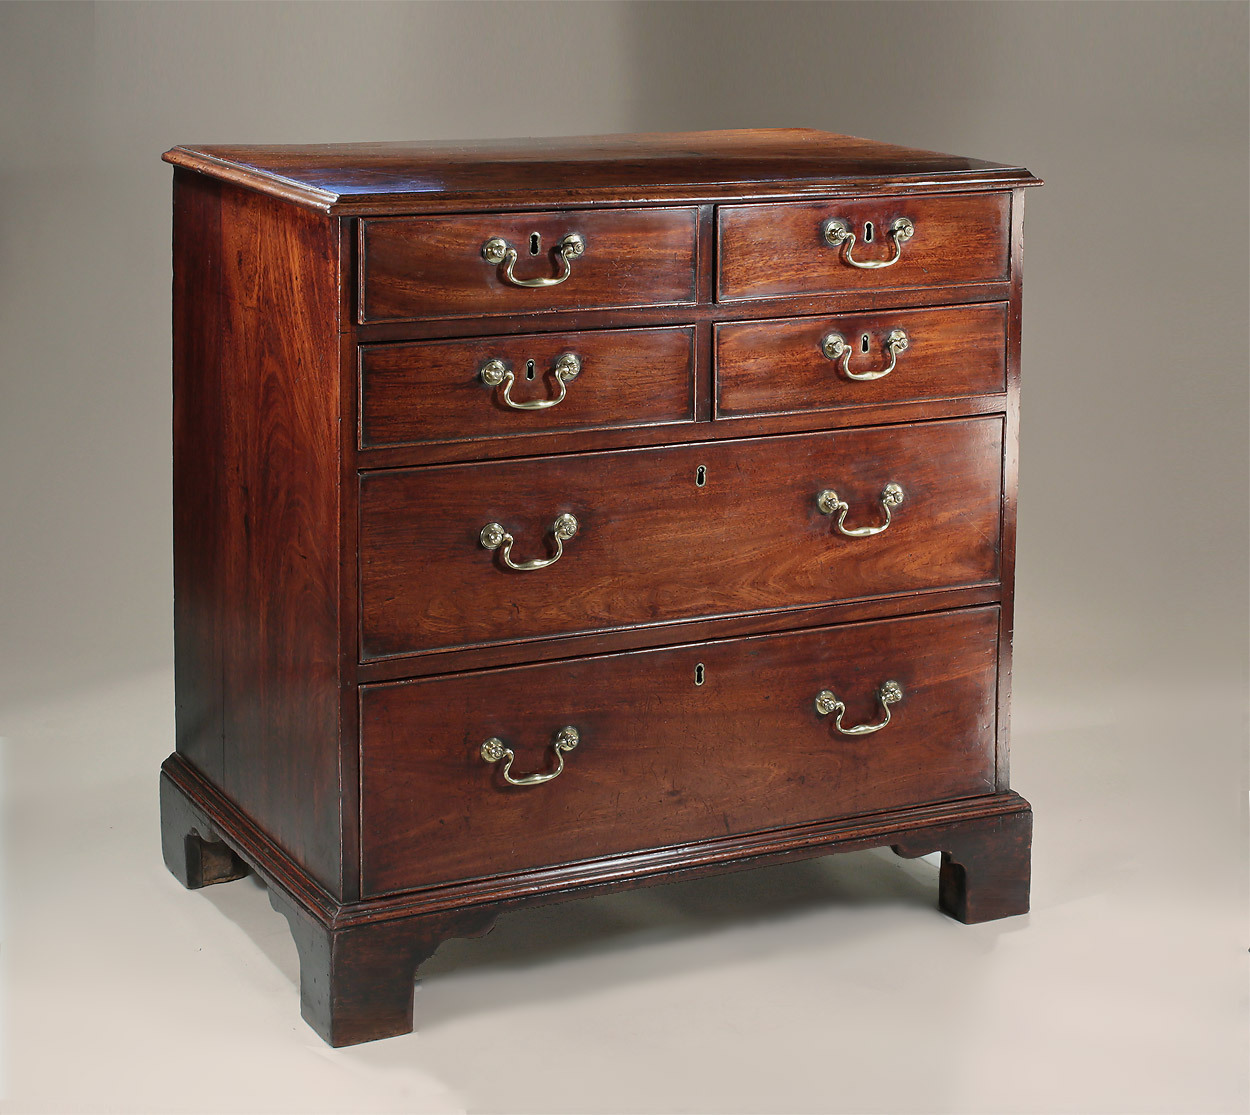 George III Diminutive Mahogany Chest of Drawers, c1765, Attributed to Thomas Chippendale 